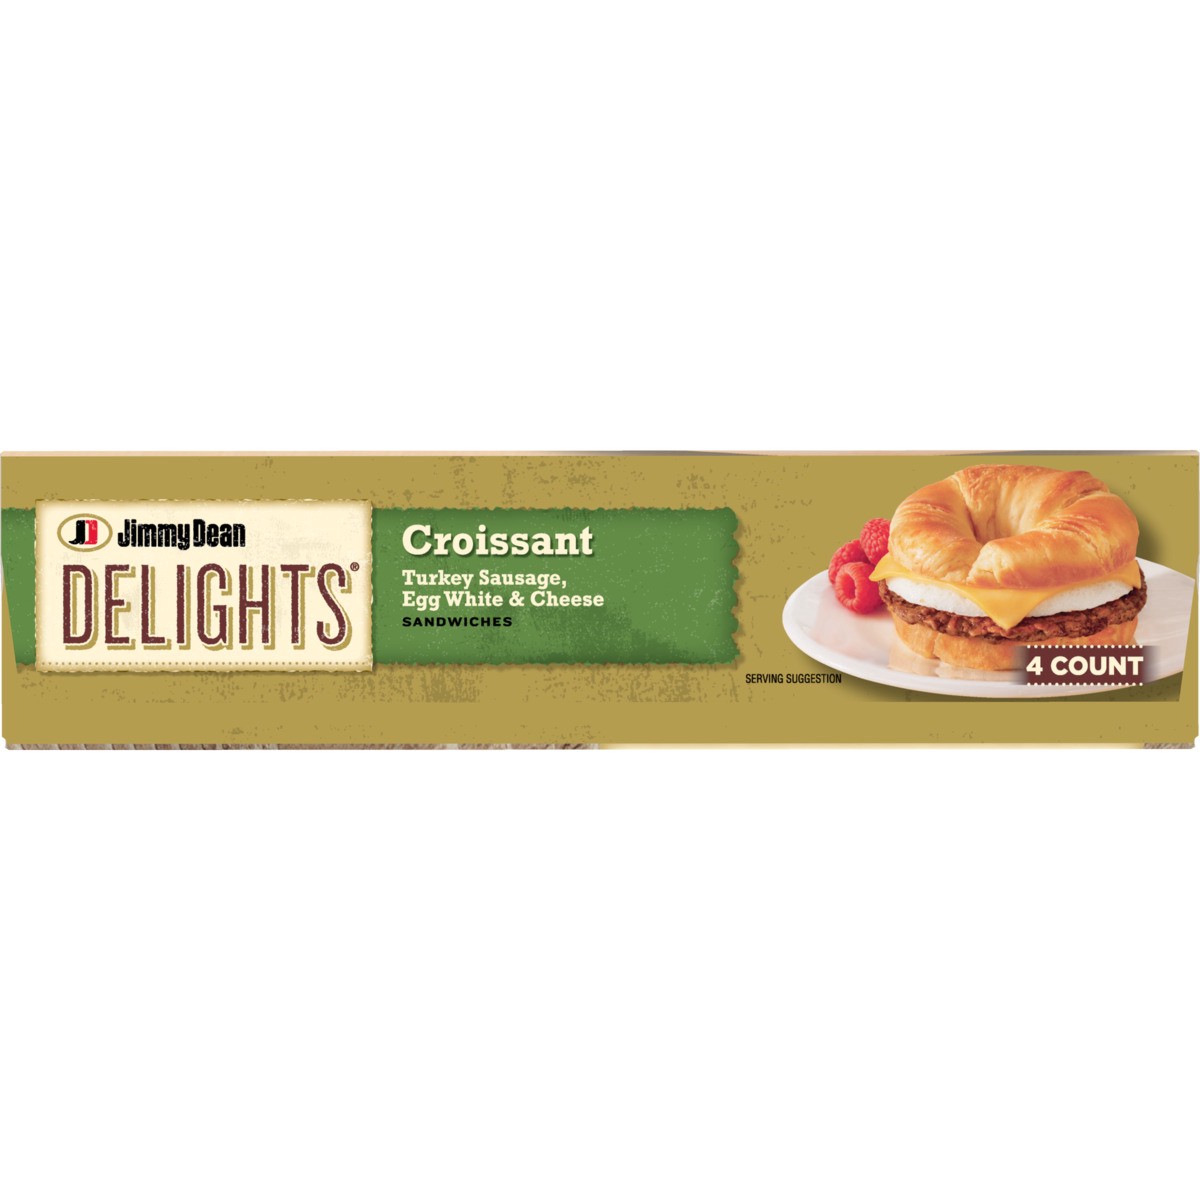 slide 7 of 9, Jimmy Dean Delights Croissant Breakfast Sandwiches with Turkey Sausage, Egg White, and Cheese, Frozen, 4 Count, 544.31 g